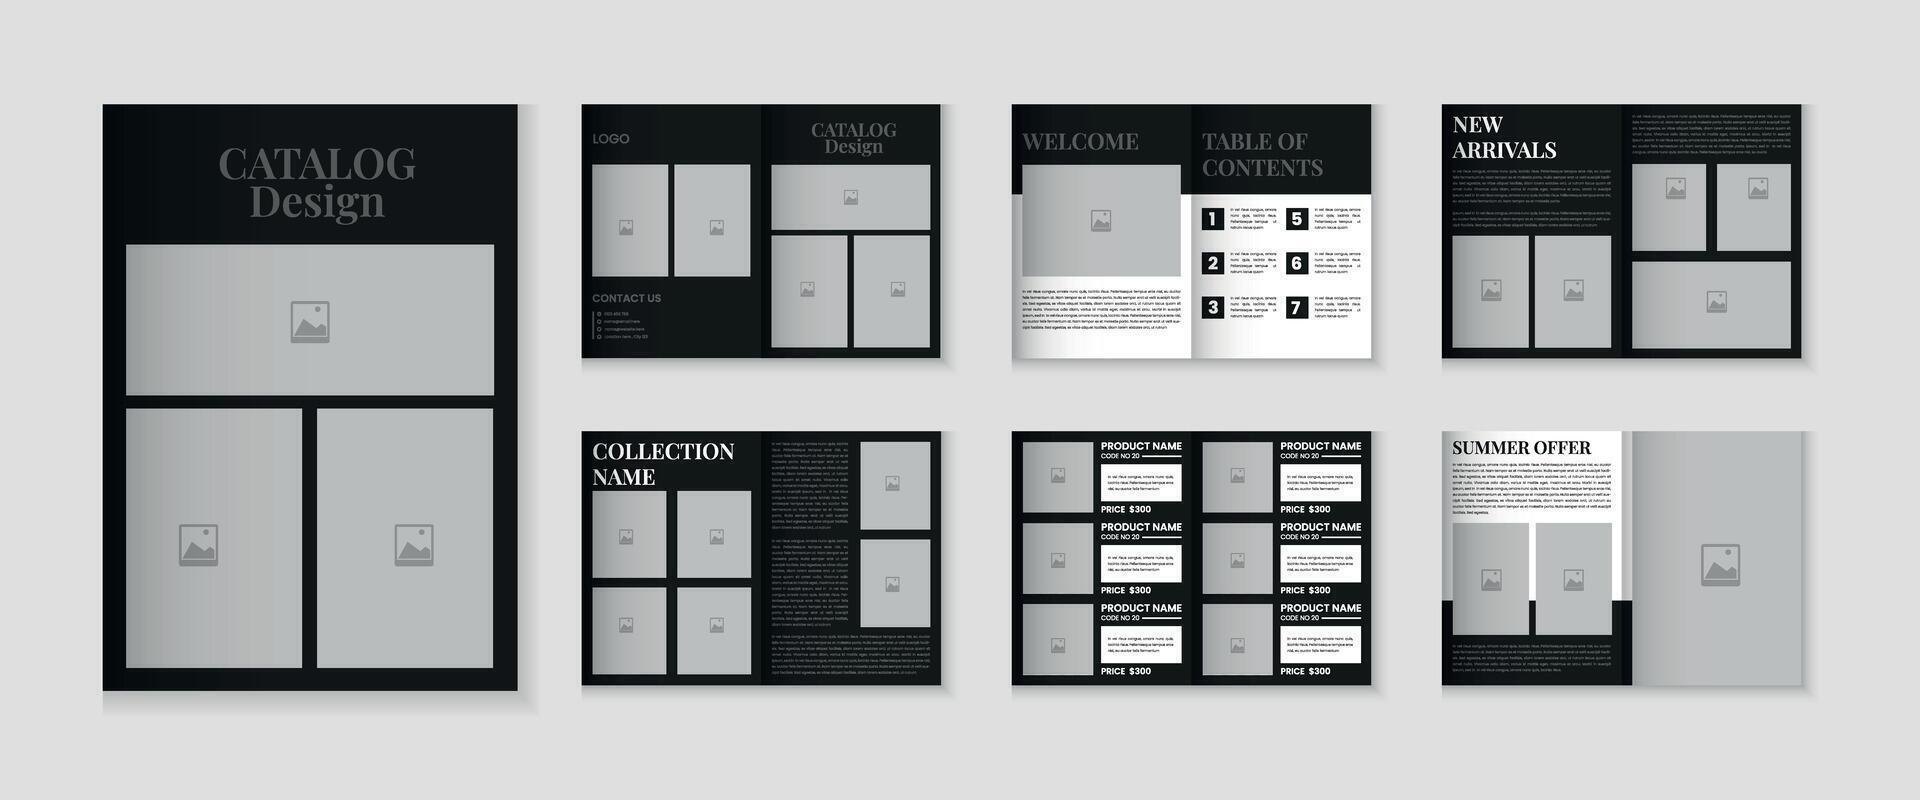 Catalog design or 12 pages product catalogue template design vector